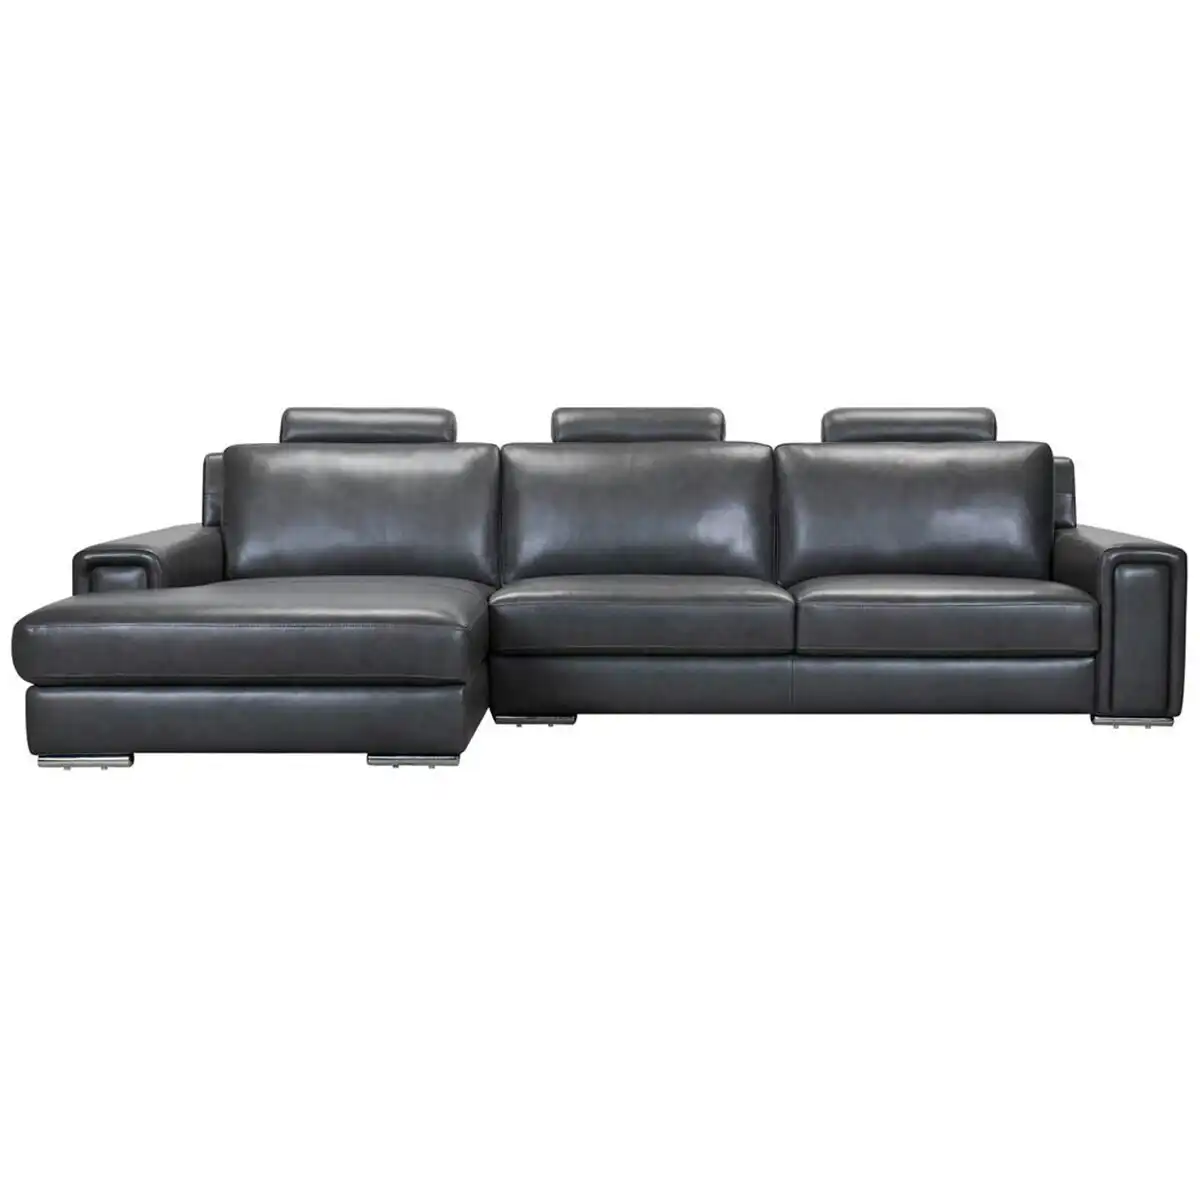 Kalona Ahlbeck Anthracite Three Seater Right Facing Chaise Sofa